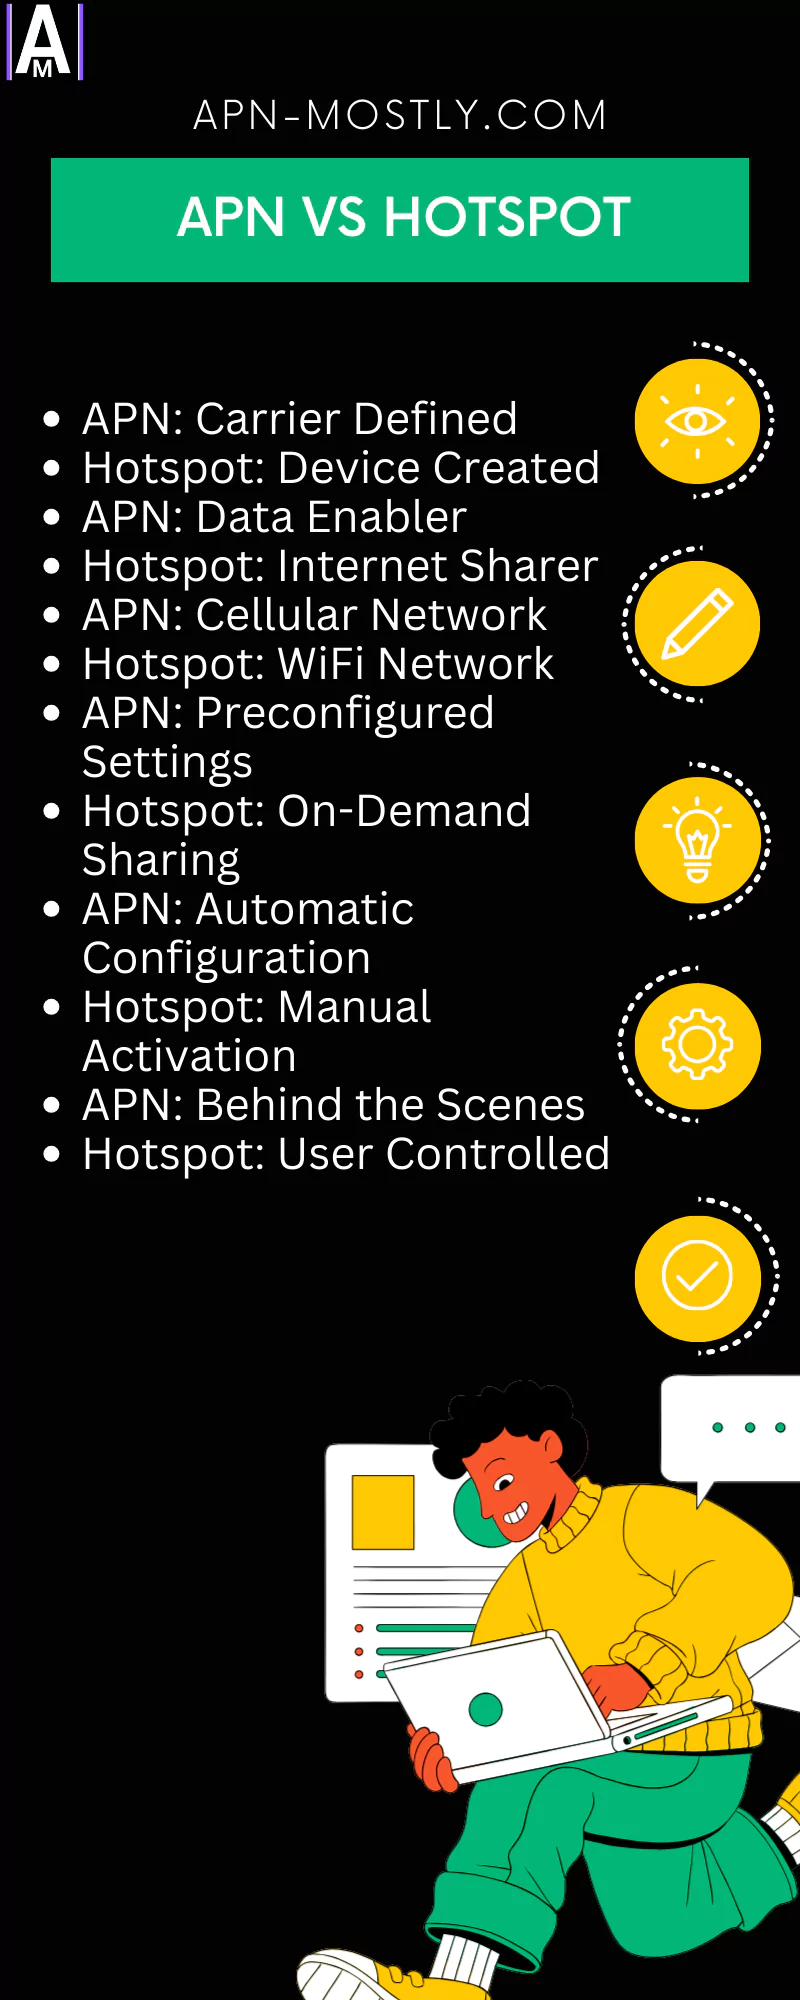 image of apn vs hotspot differences